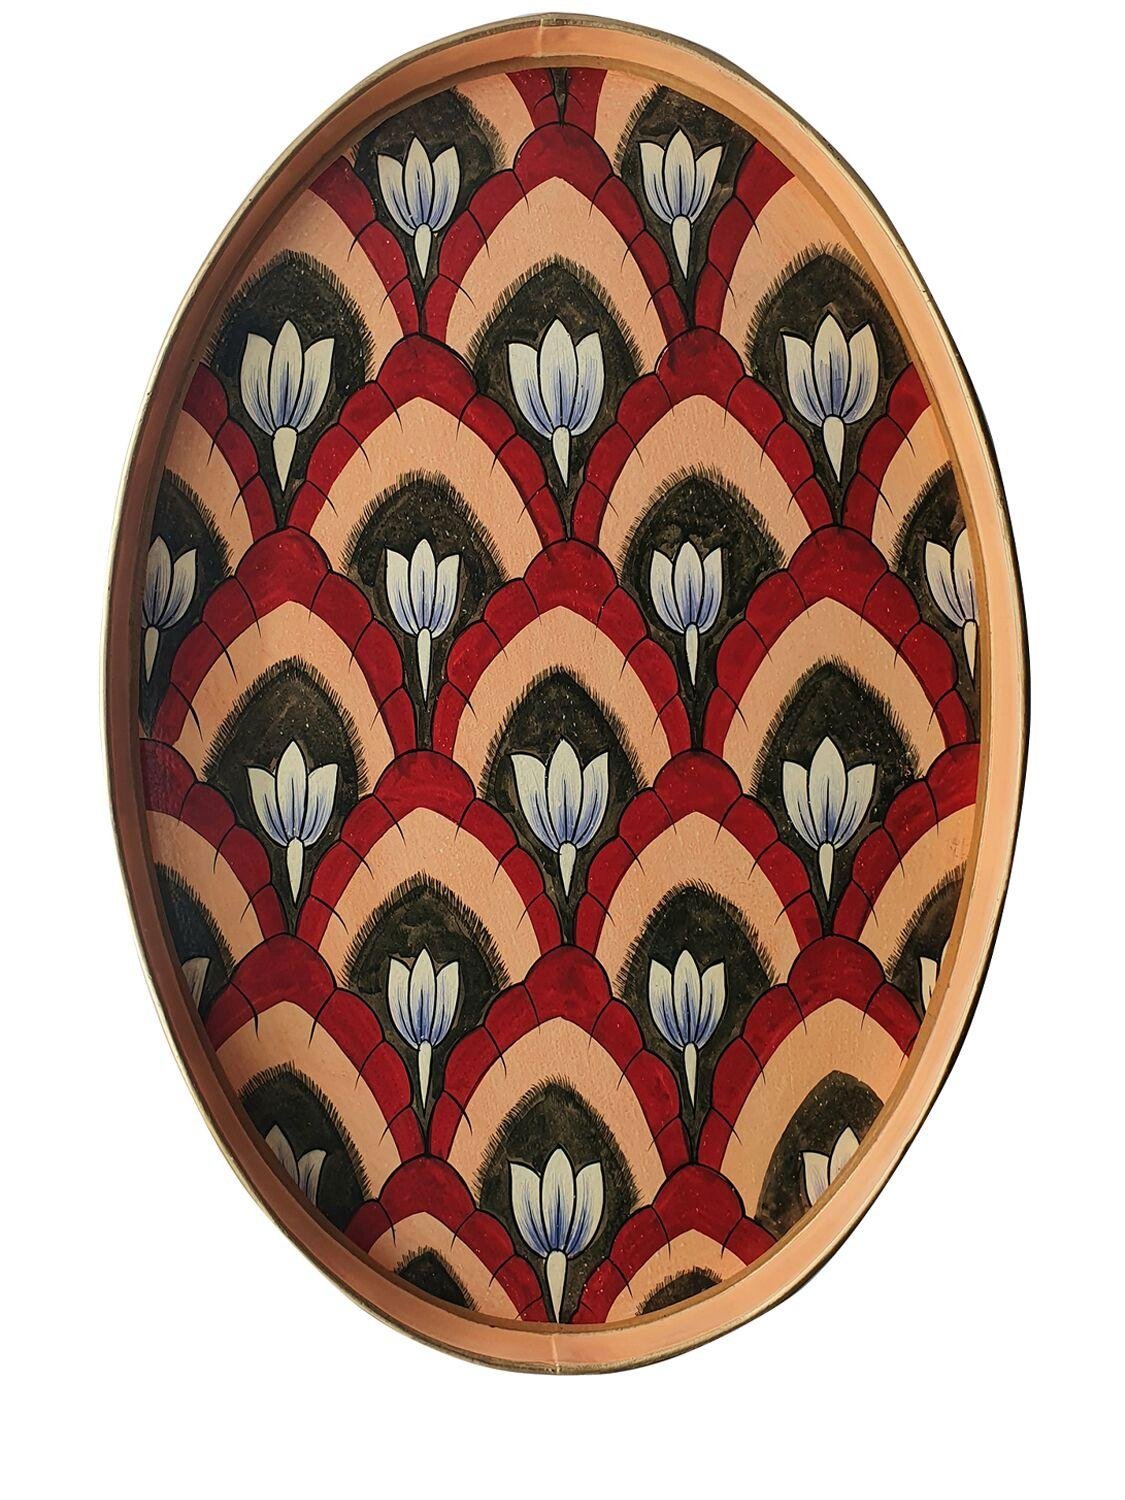 Ikat Hand-painted Iron Tray by LES OTTOMANS